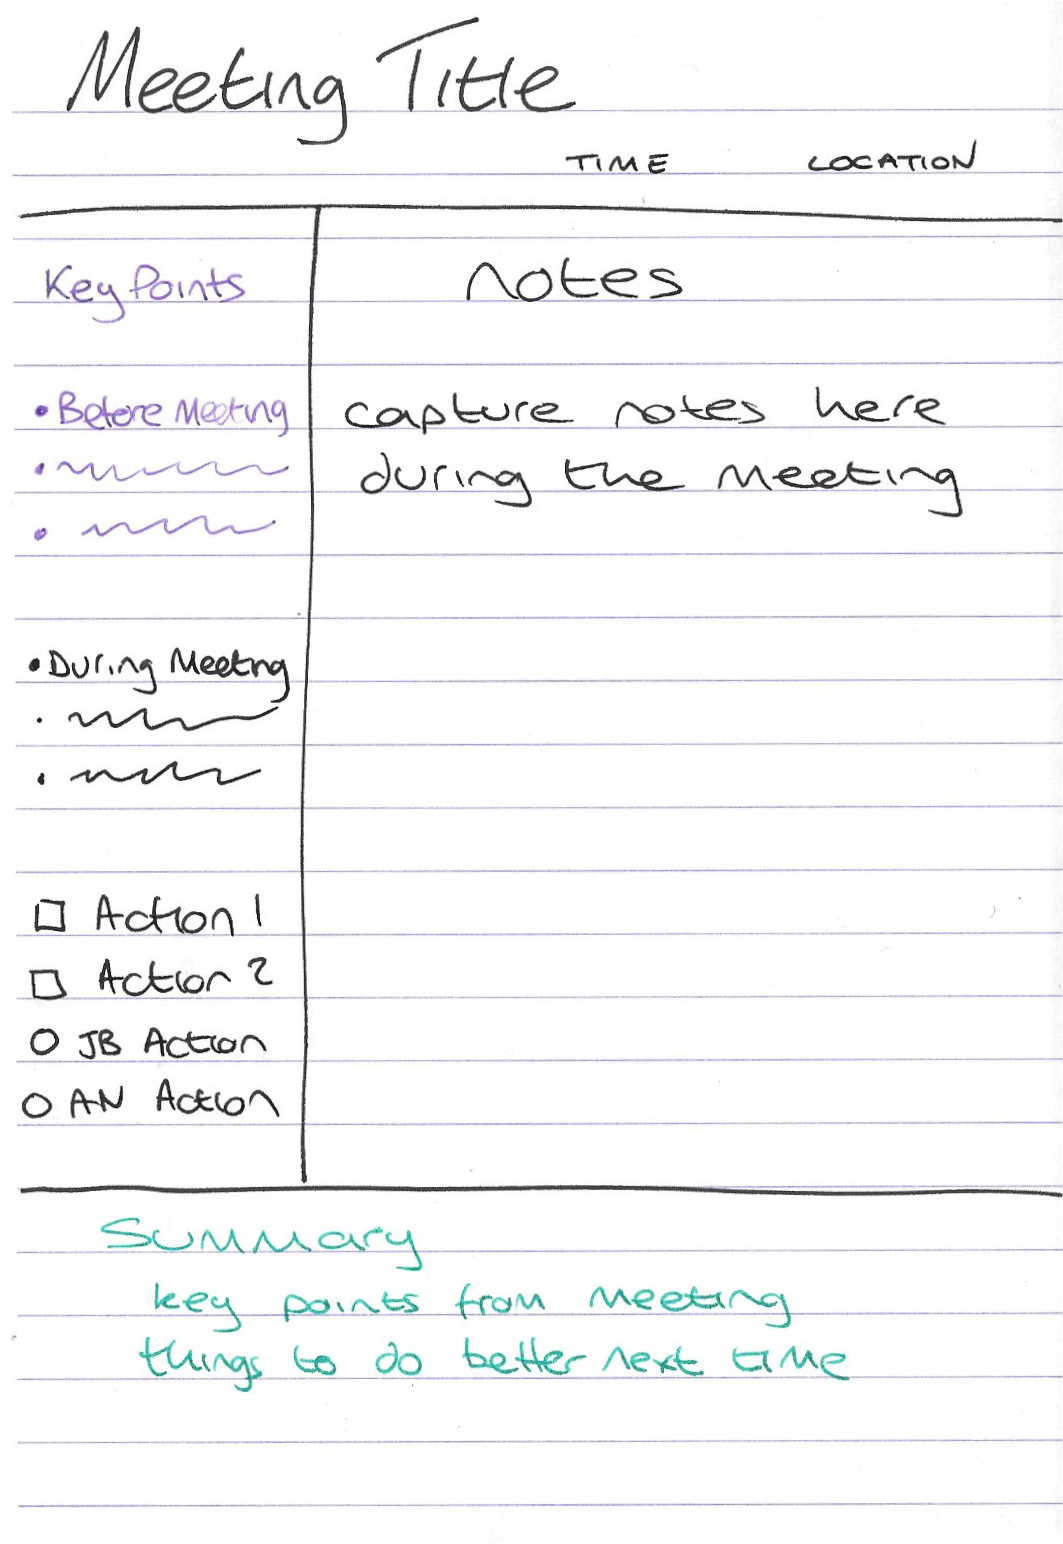 How to take effective meeting notes - Differently Wired